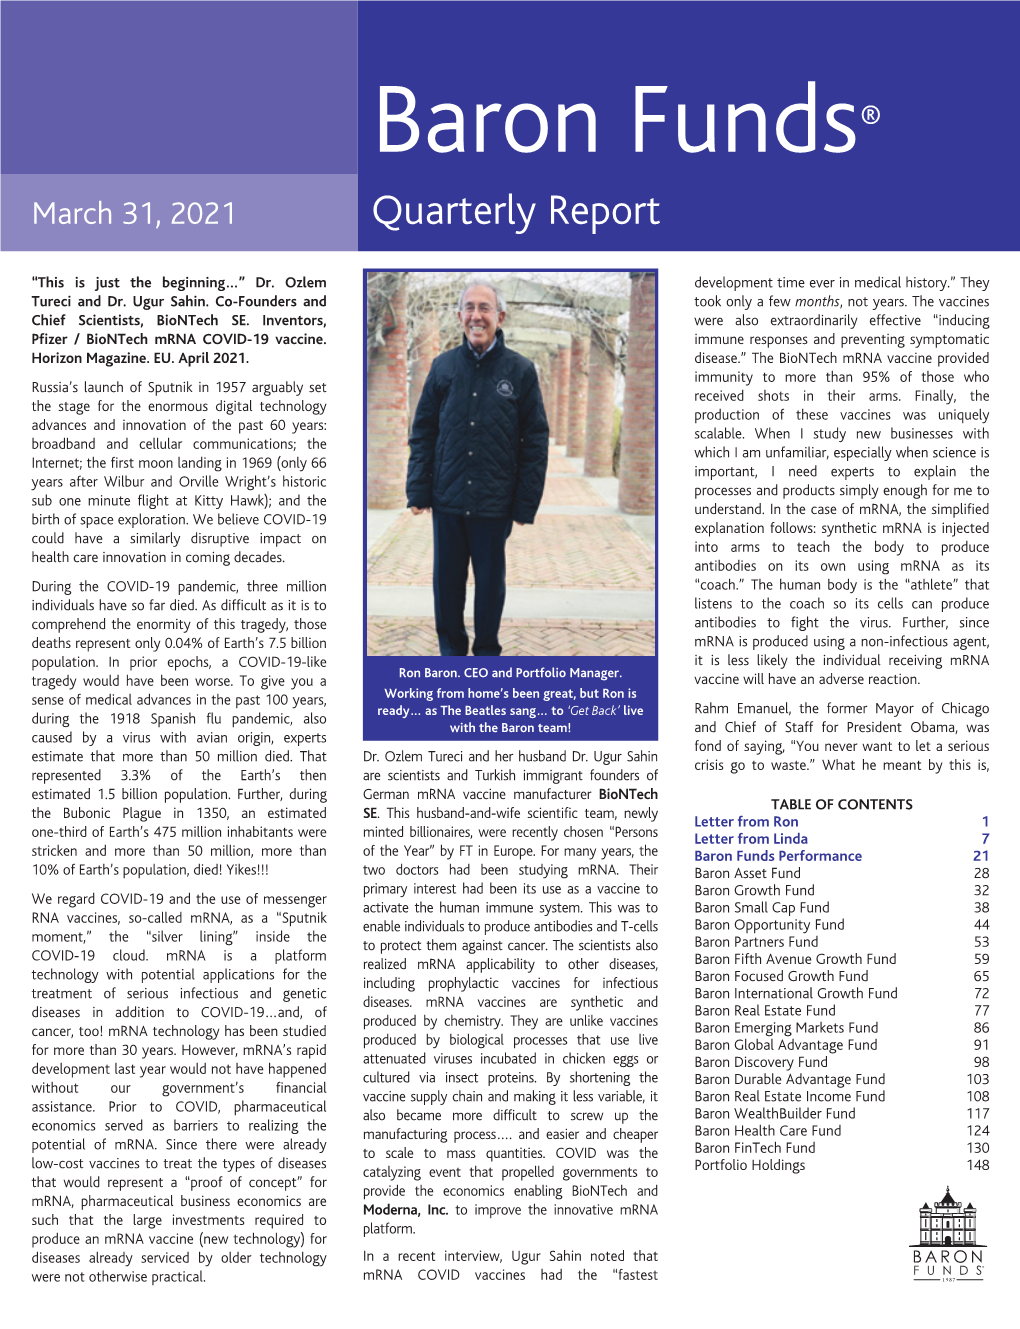 March 31, 2021 Quarterly Report